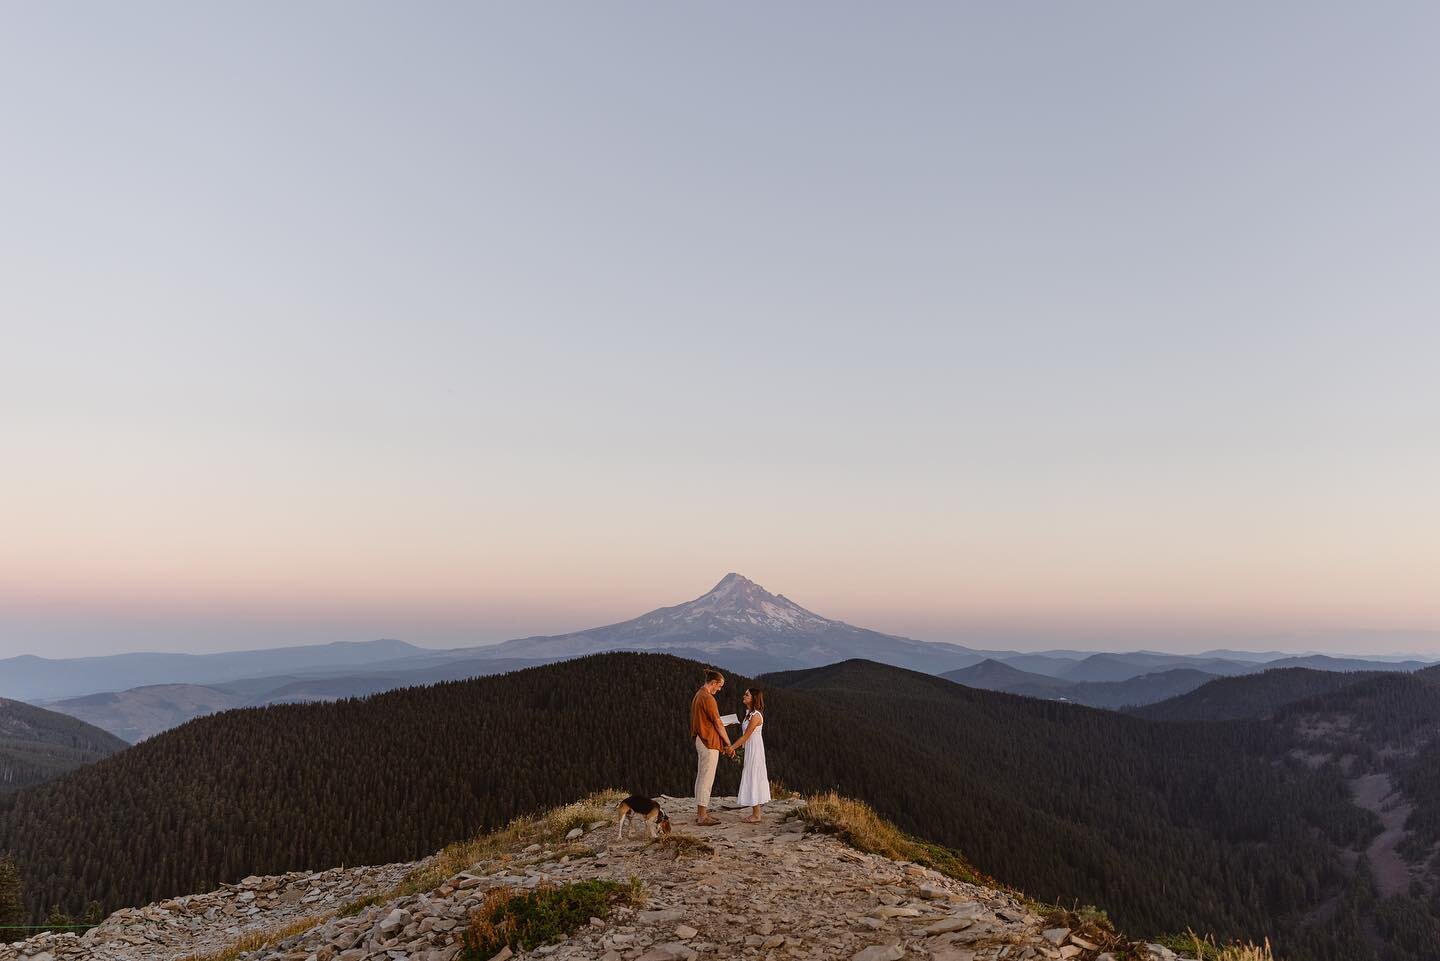 These two could not have had a more beautiful and warm sunset ceremony with Mt. Hood/Wy&rsquo;East in the background. These photos were also taken during blue hour, which is right after the sun dips behind the horizon or mountains and it creates the 